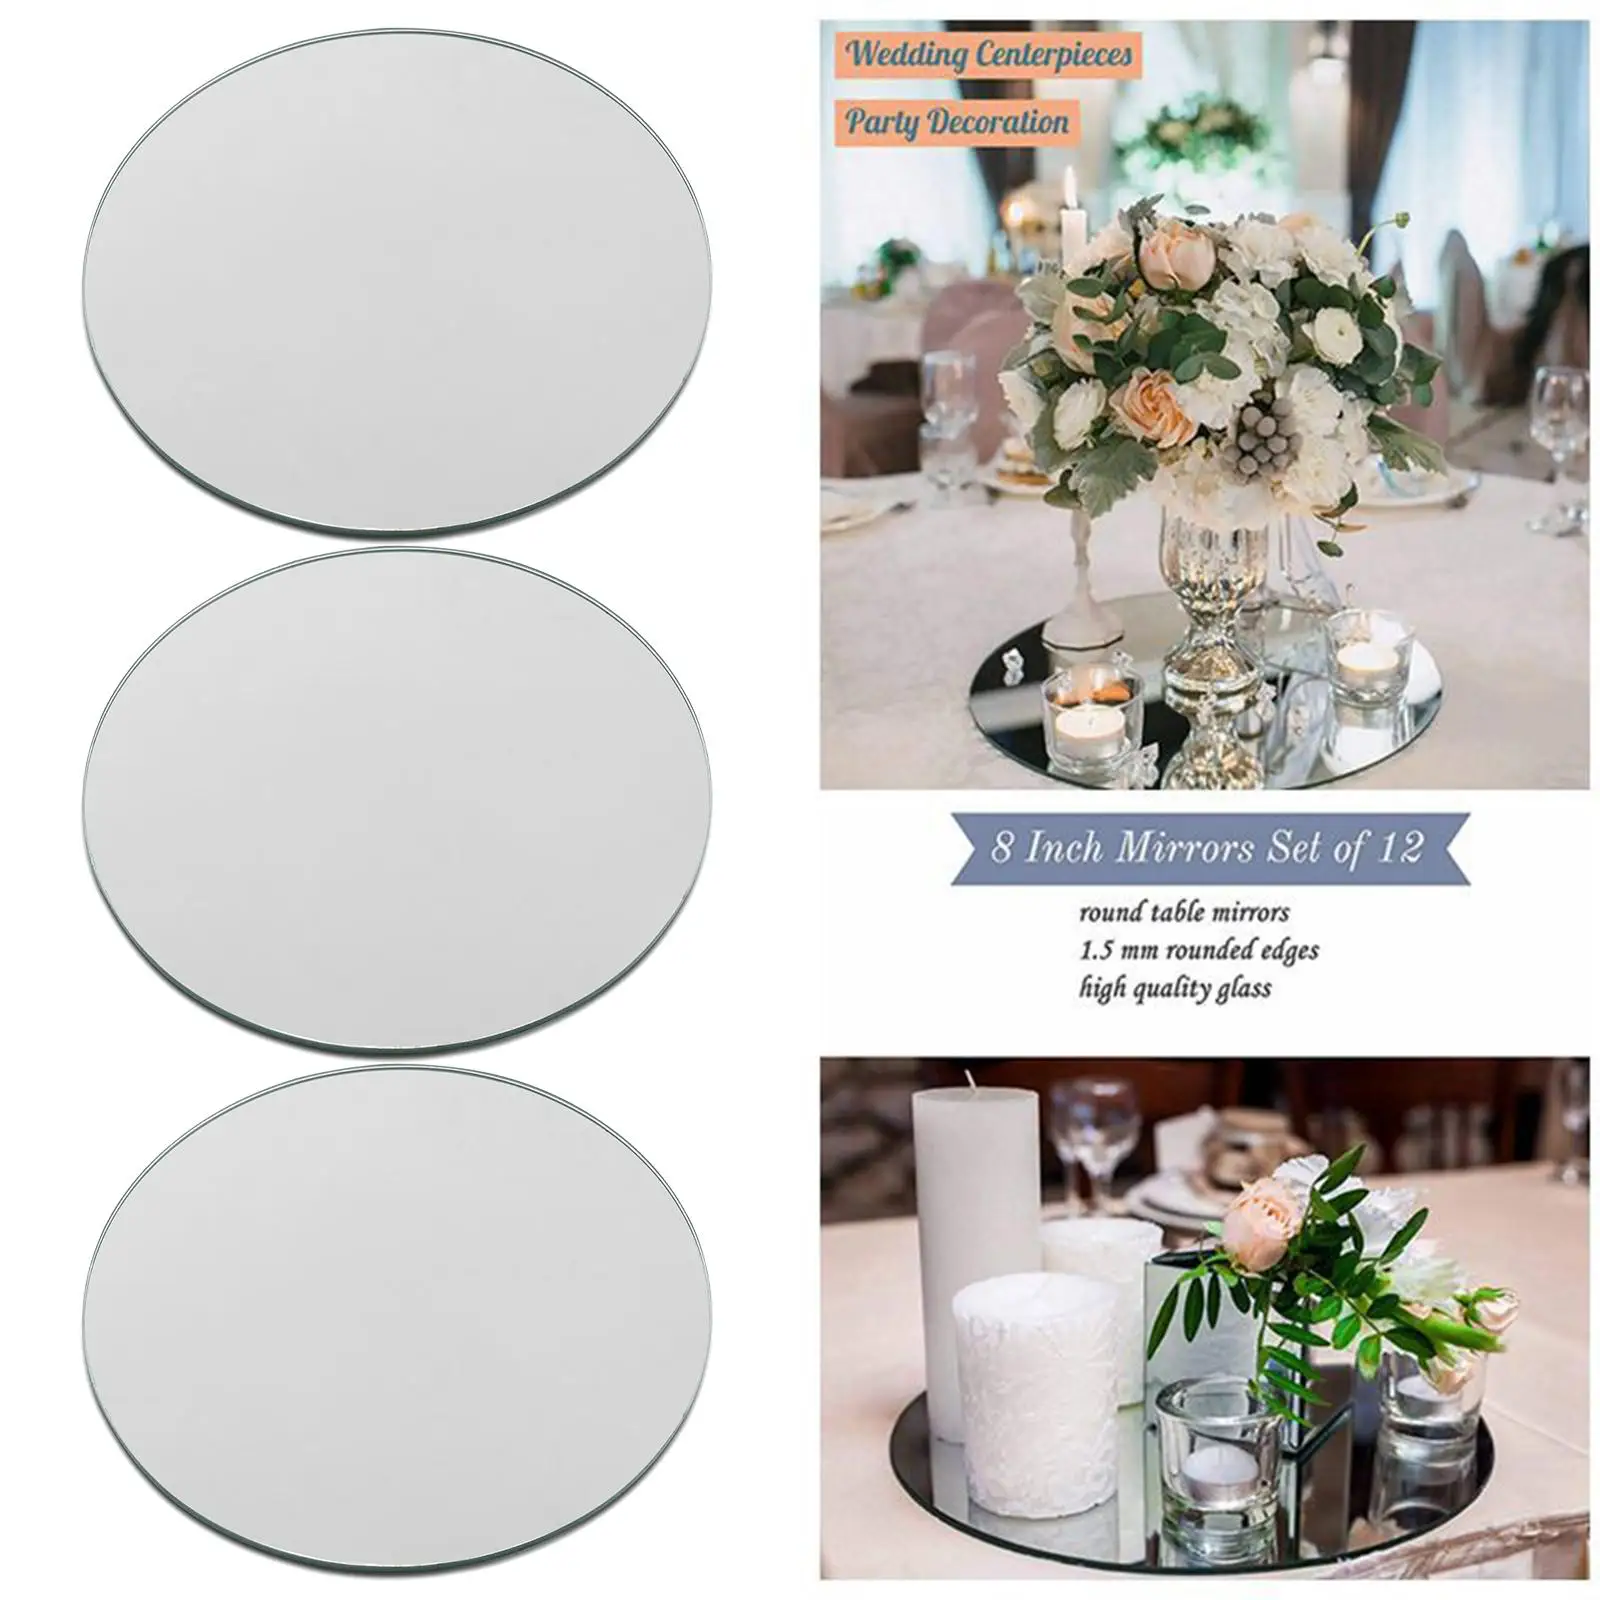 Round Mirror Plate Candle Plate Decorative Mirror Trays for Wedding Centerpieces